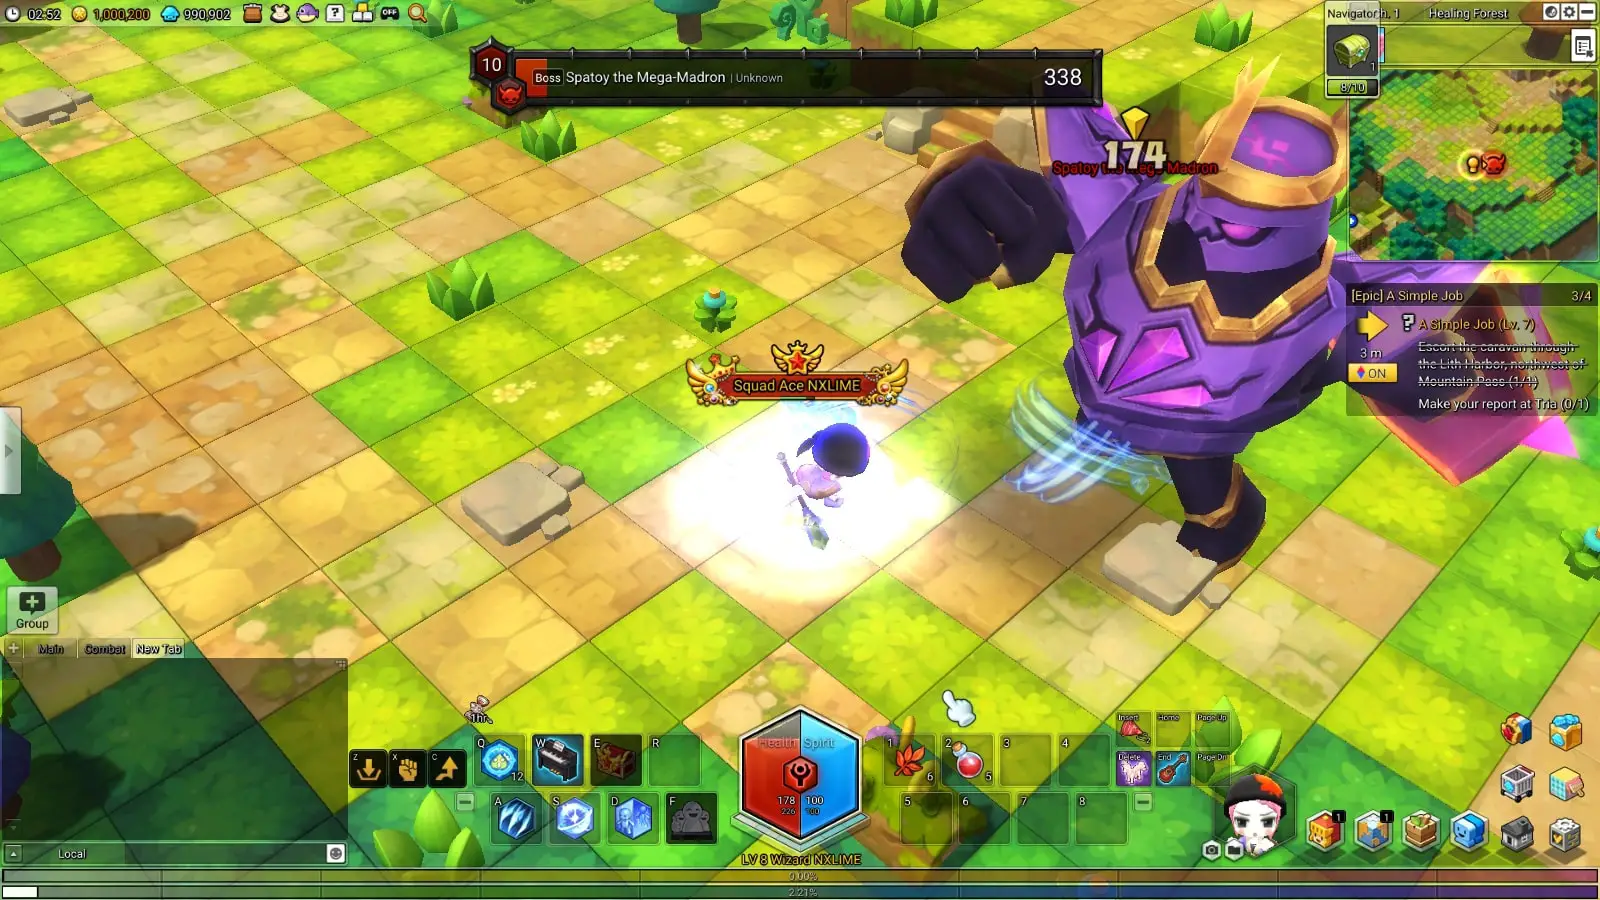 Maplestory player playing the round, defeating the enemy